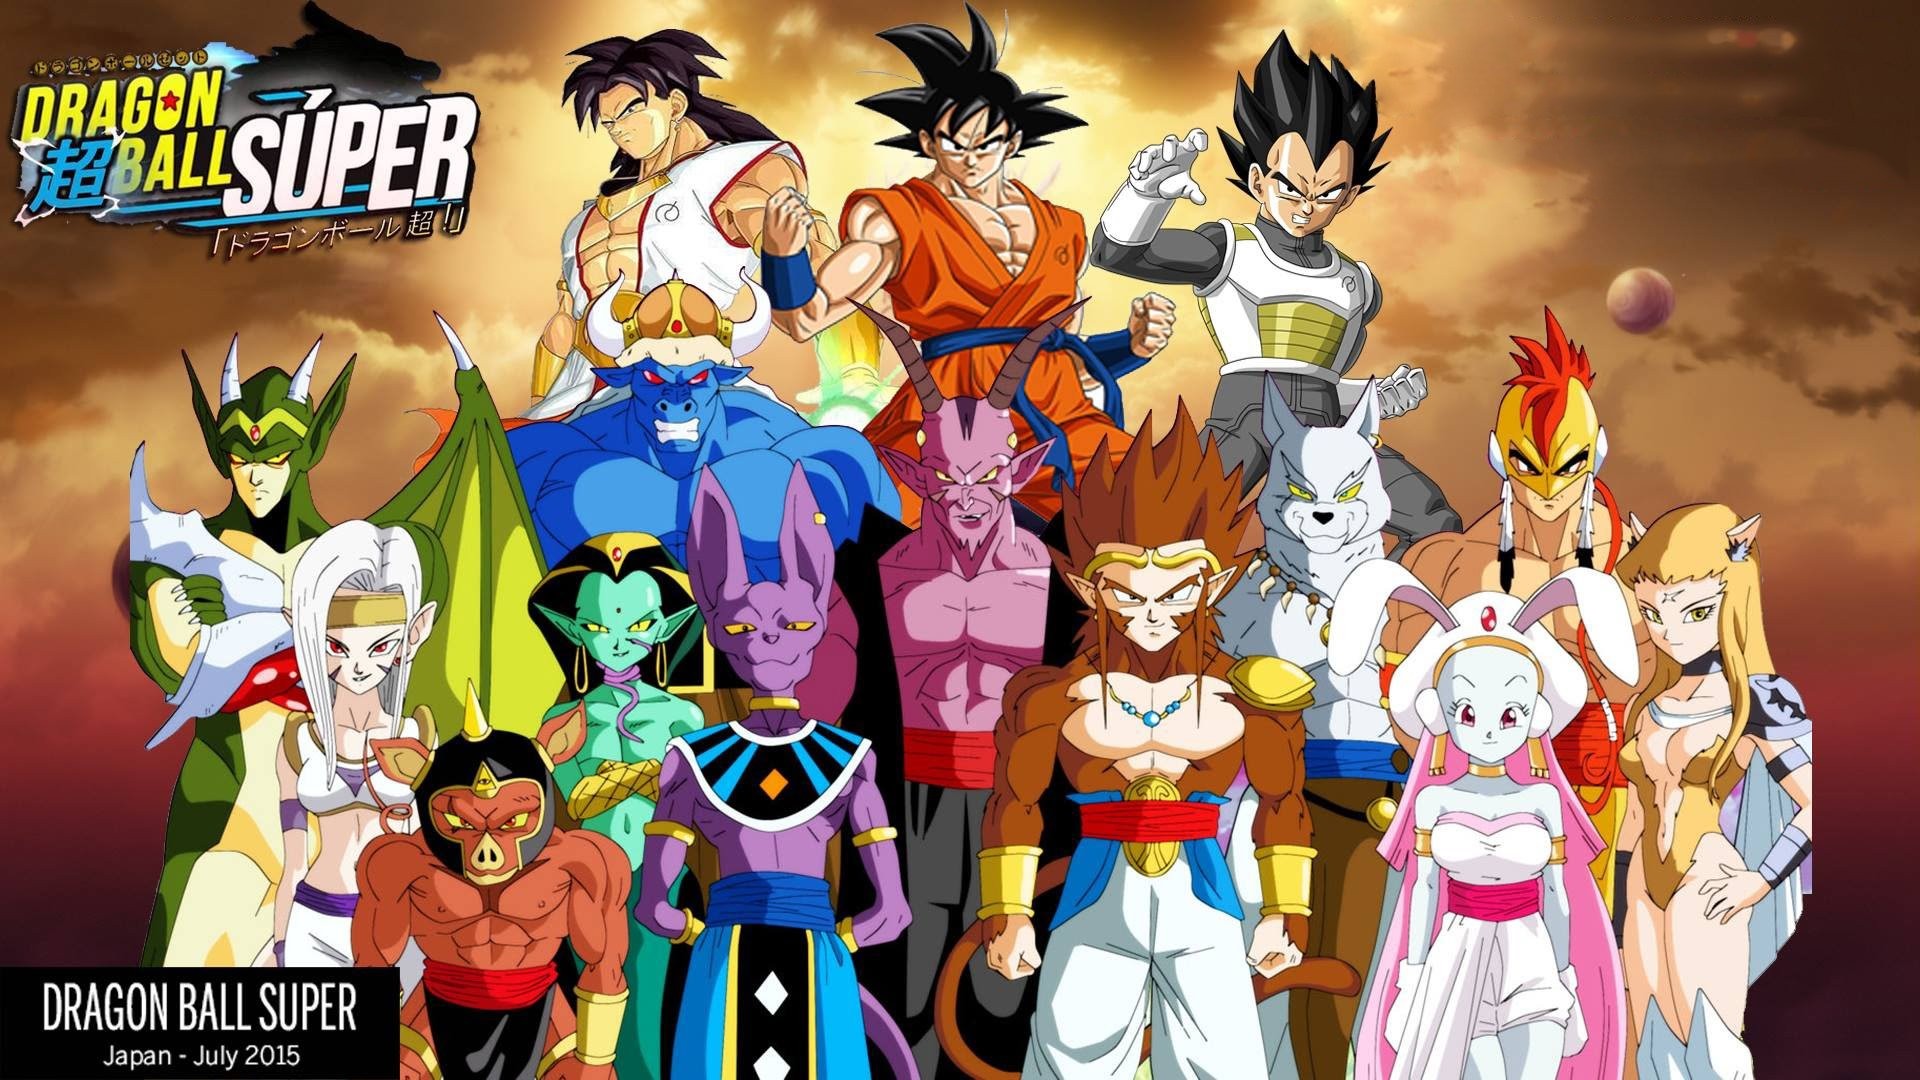 Dragon Ball Super Wallpaper ·① Download Free Awesome Full Hd Wallpapers For Desktop And Mobile